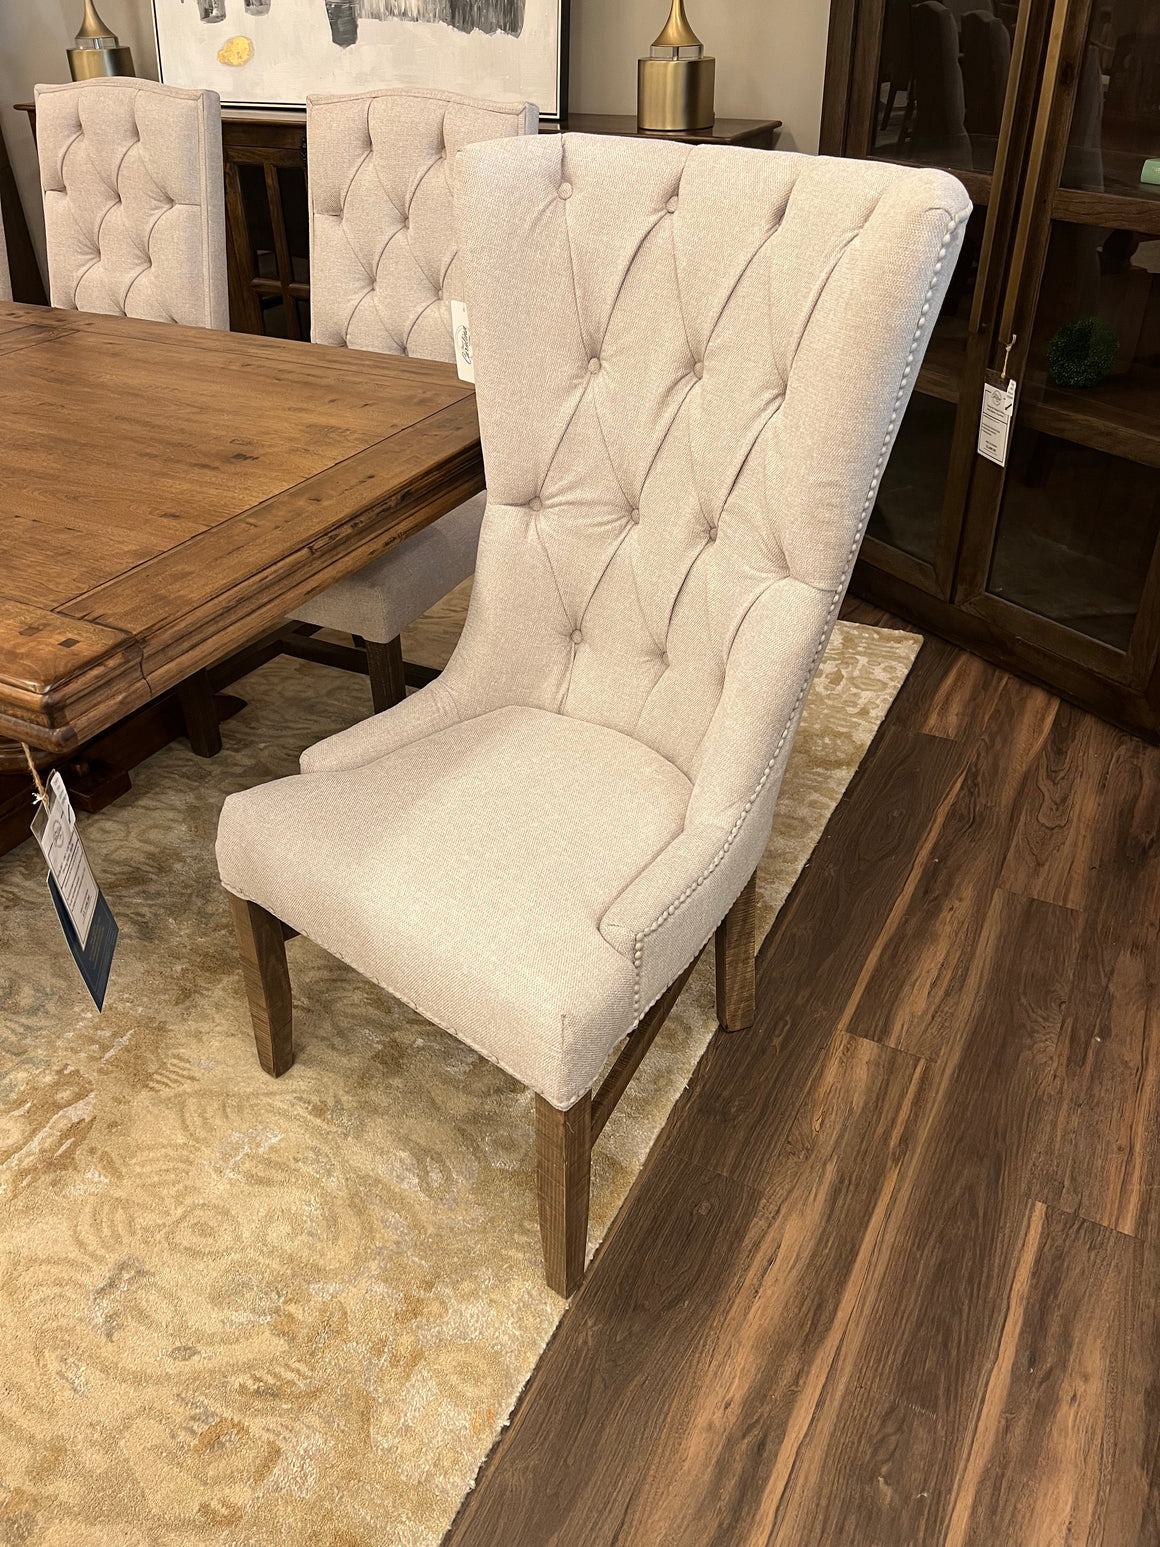 Morgan Tufted Dining End Chair - Sand + Earth